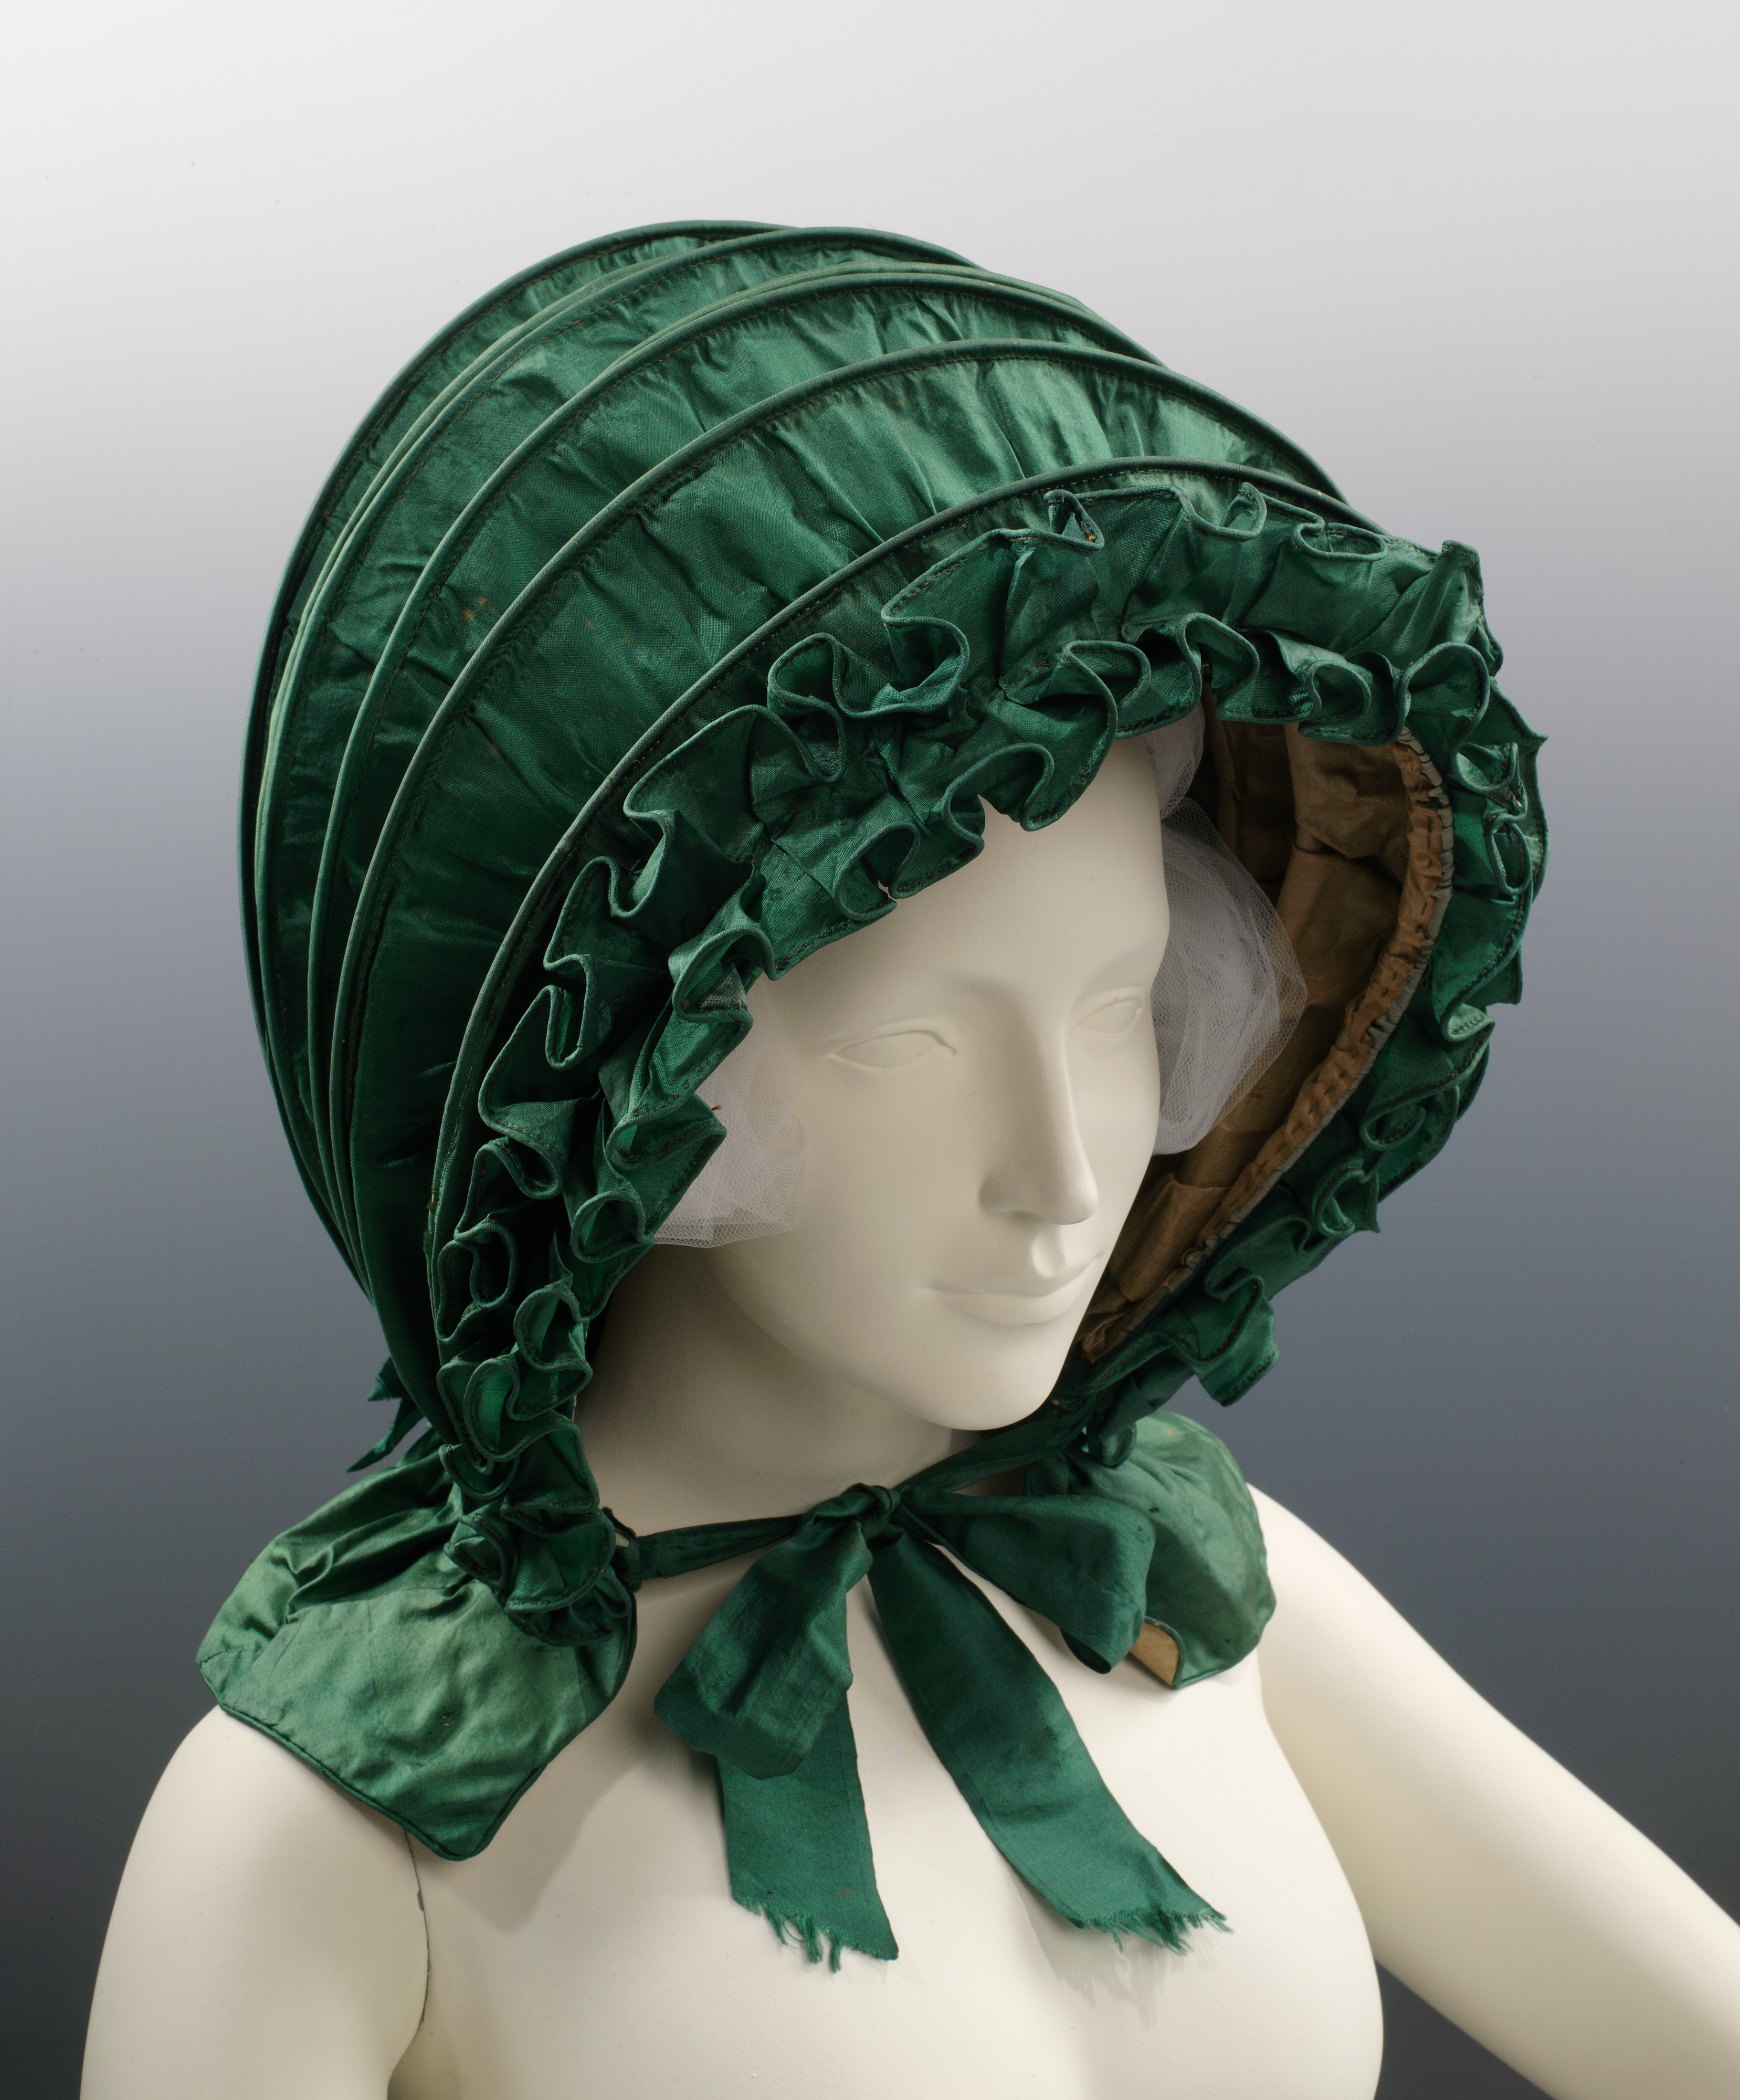 The Significance and History of Bonnets